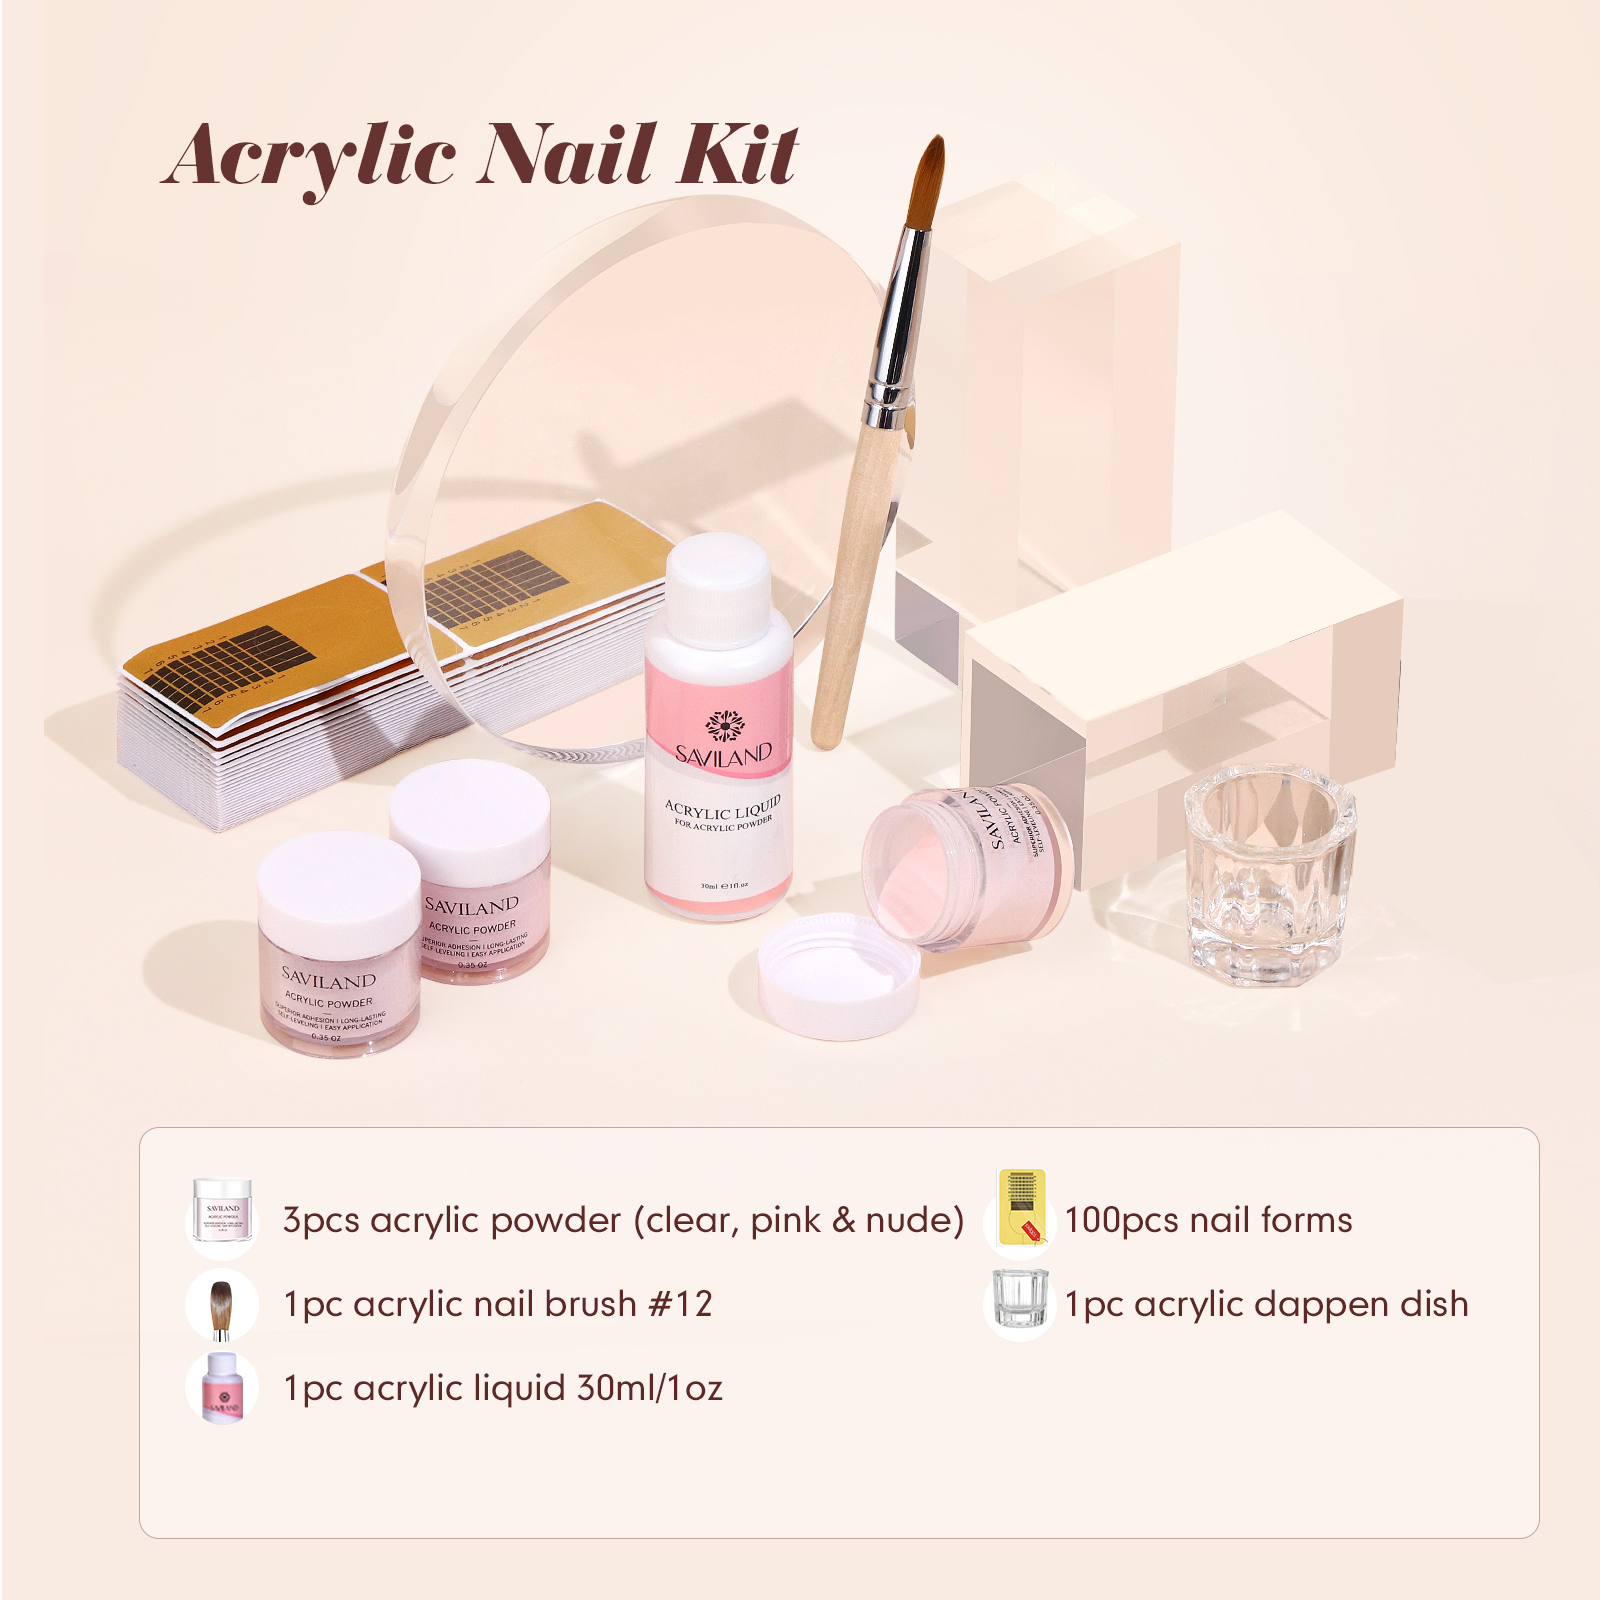 Saviland Acrylic Nail Kit - 3 Colors Clear/Pink/Nudes Acrylic Powder and Liquid Set with Monomer Acrylic Liquid, Acrylic Nail Brush and Nail Forms for Beginner - image 3 of 9